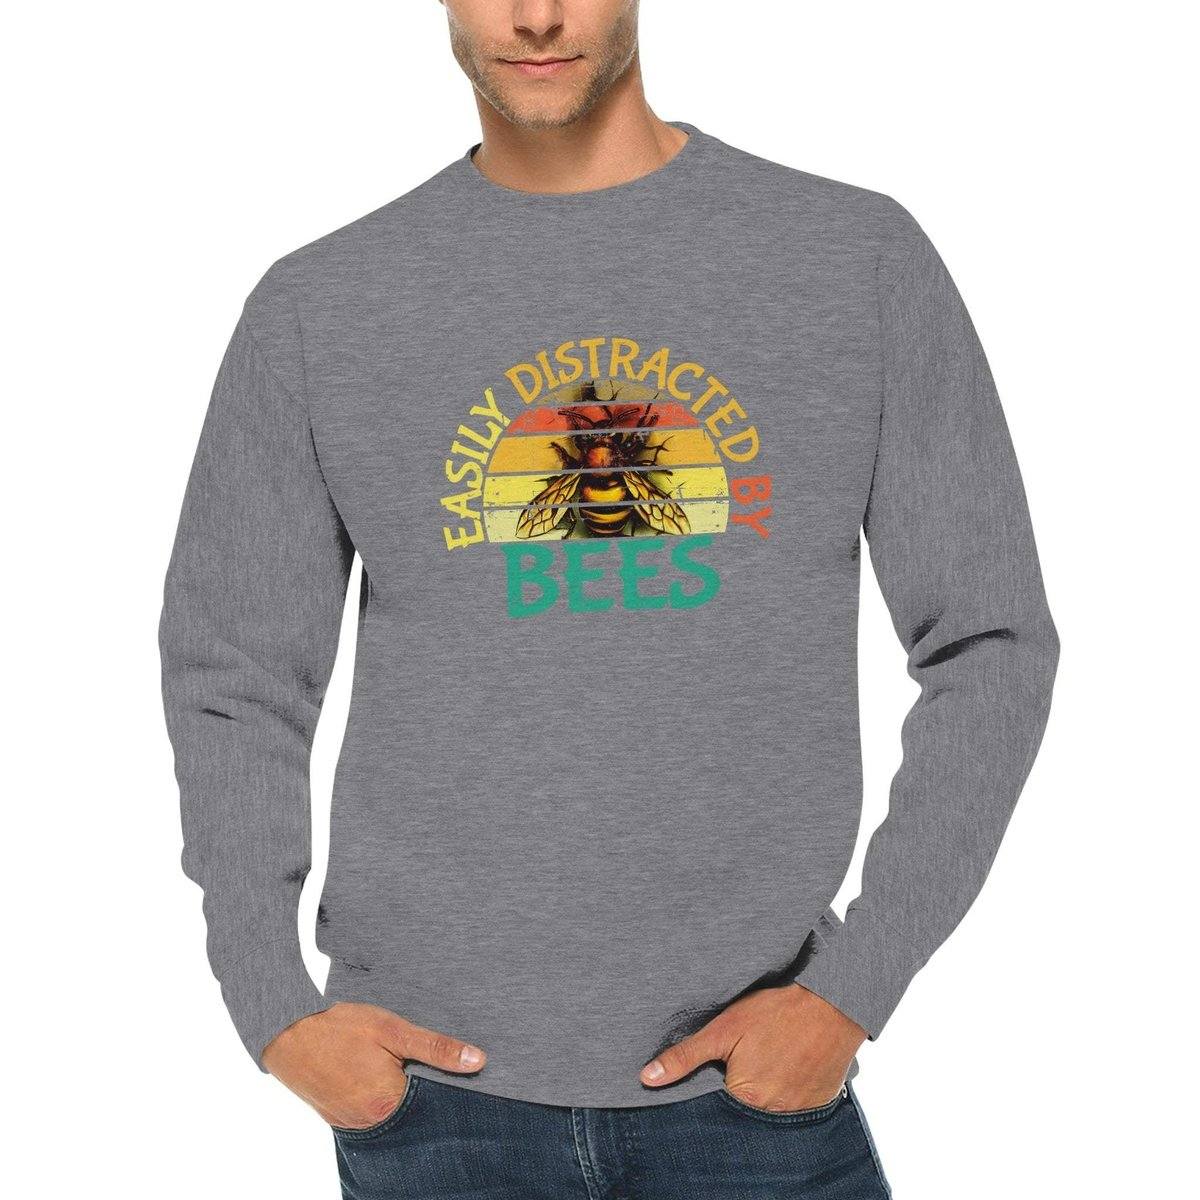 Easily Distracted By Bees Jumper - Retro Vintage Sunset - Premium Unisex Crewneck Sweatshirt Adults Jumpers Heather Gray / S Bee Clothing Australia